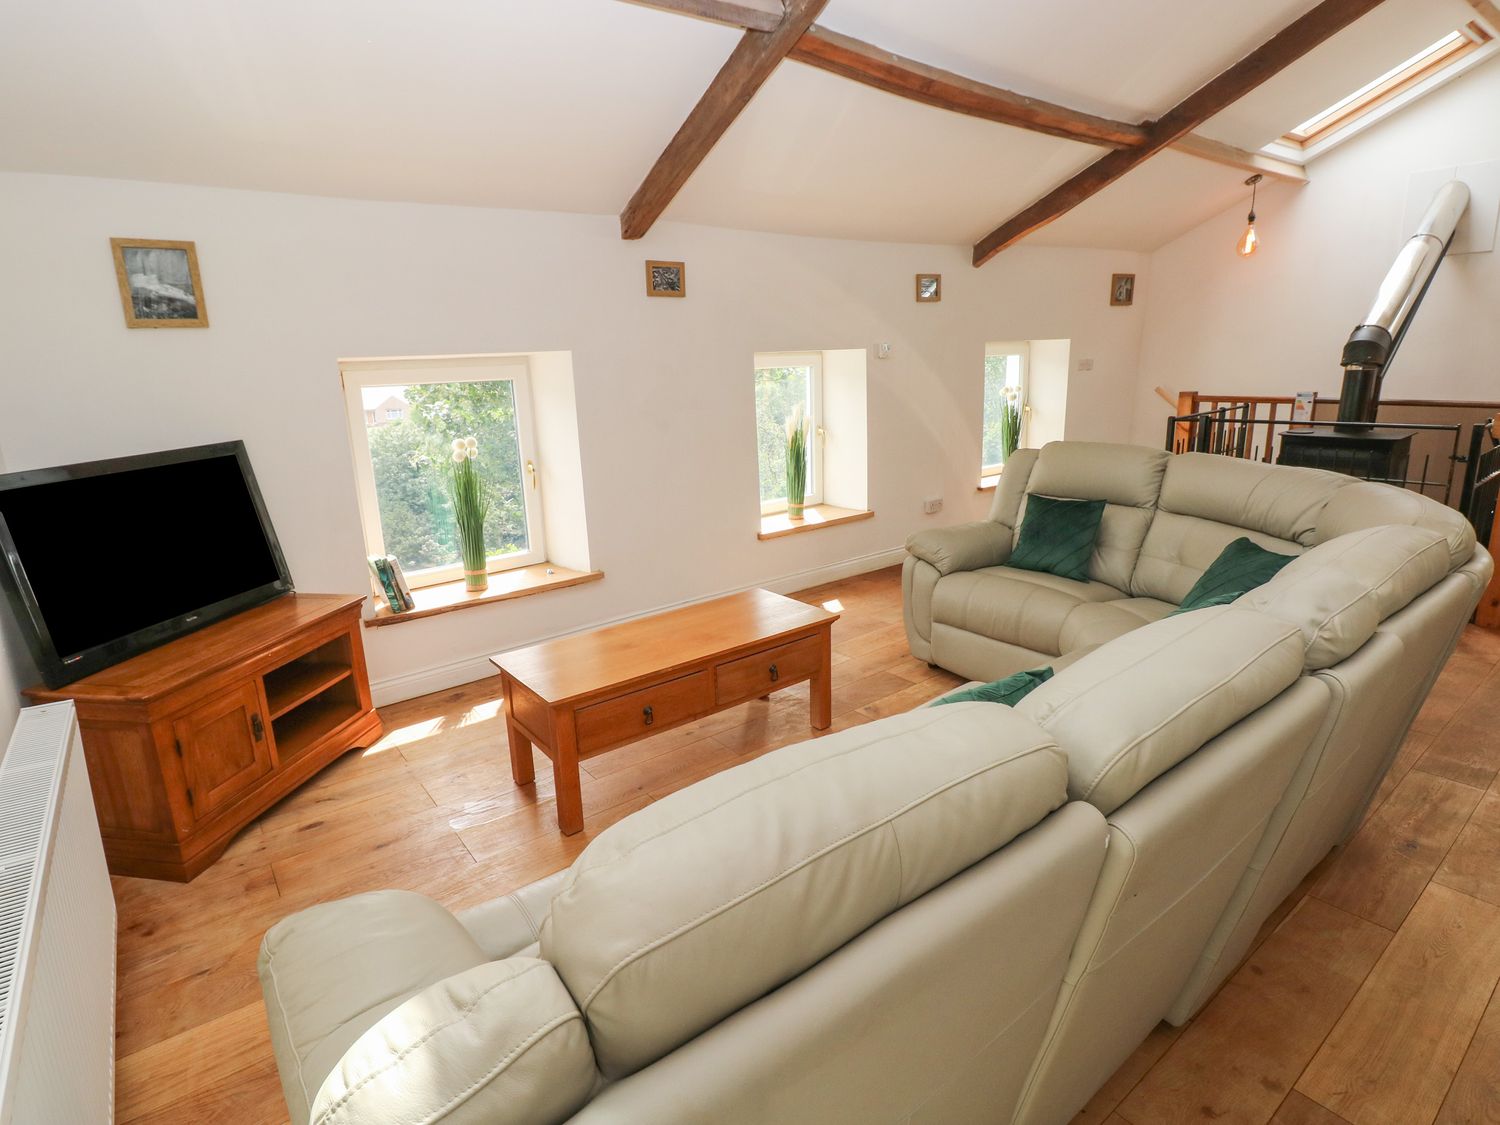 Greenheart Cottage - South Wales - 1134416 - photo 1